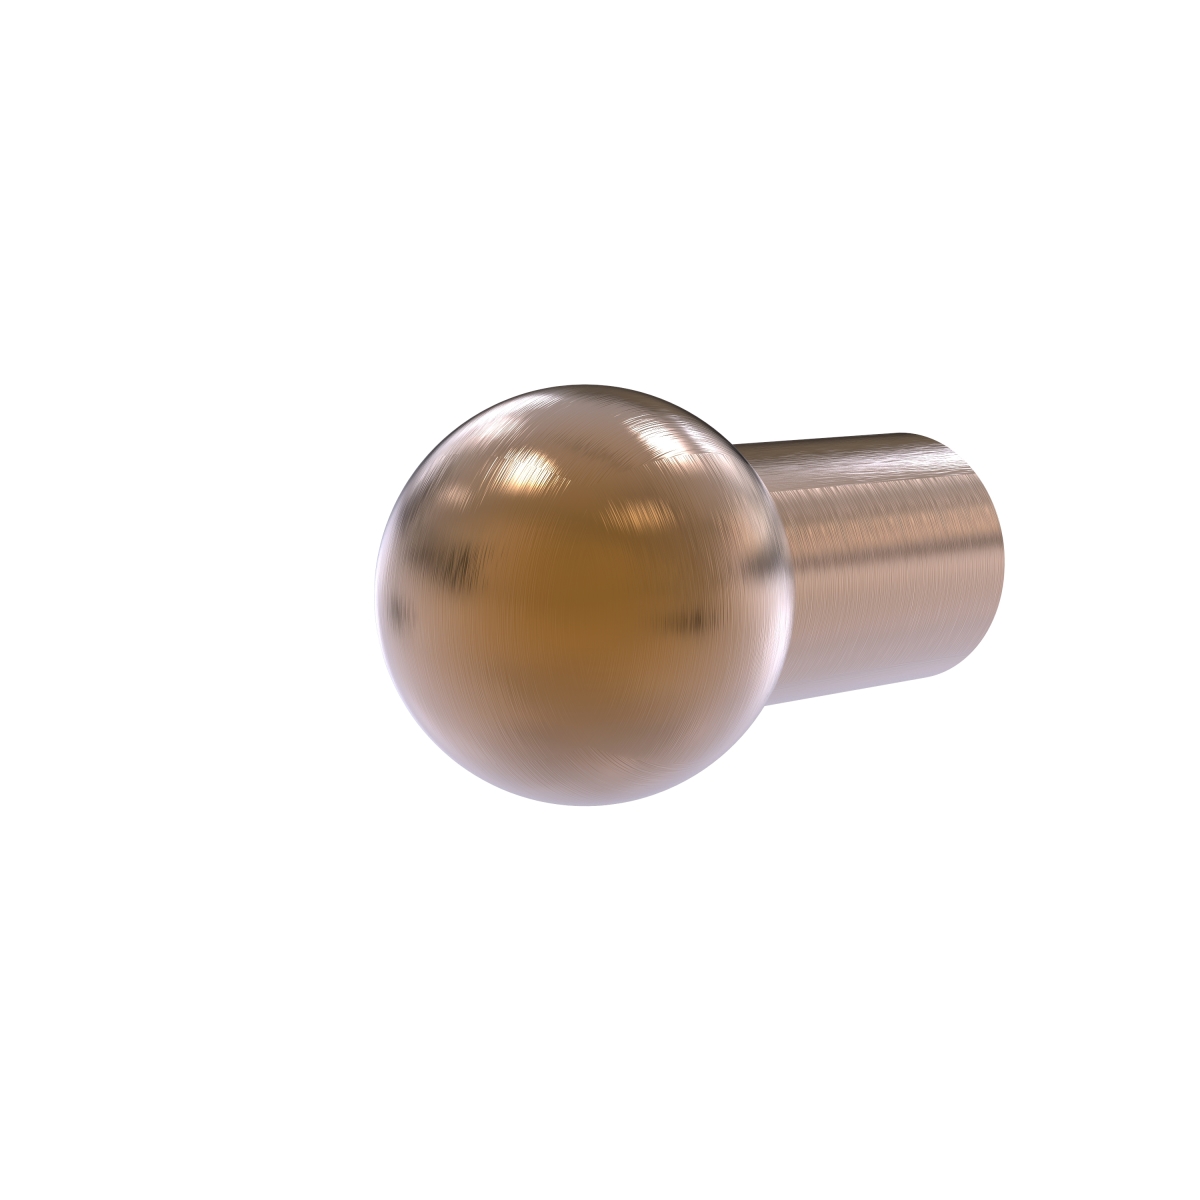 A-10-bbr 0.75 In. Cabinet Knob, Brushed Bronze